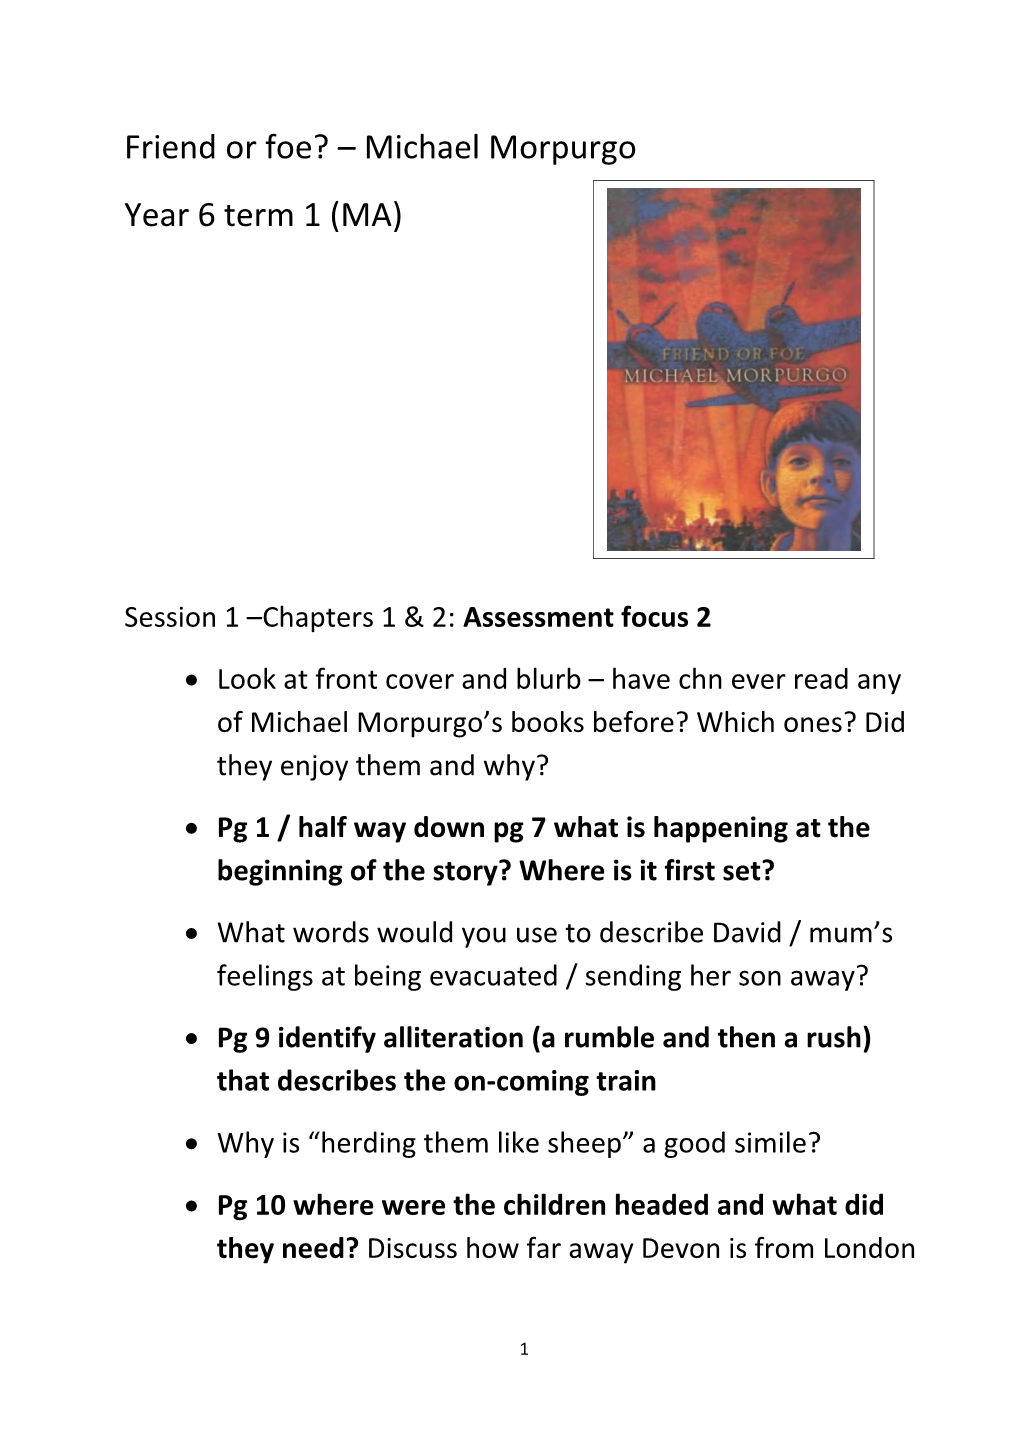 Session 1 Chapters 1 & 2: Assessment Focus 2